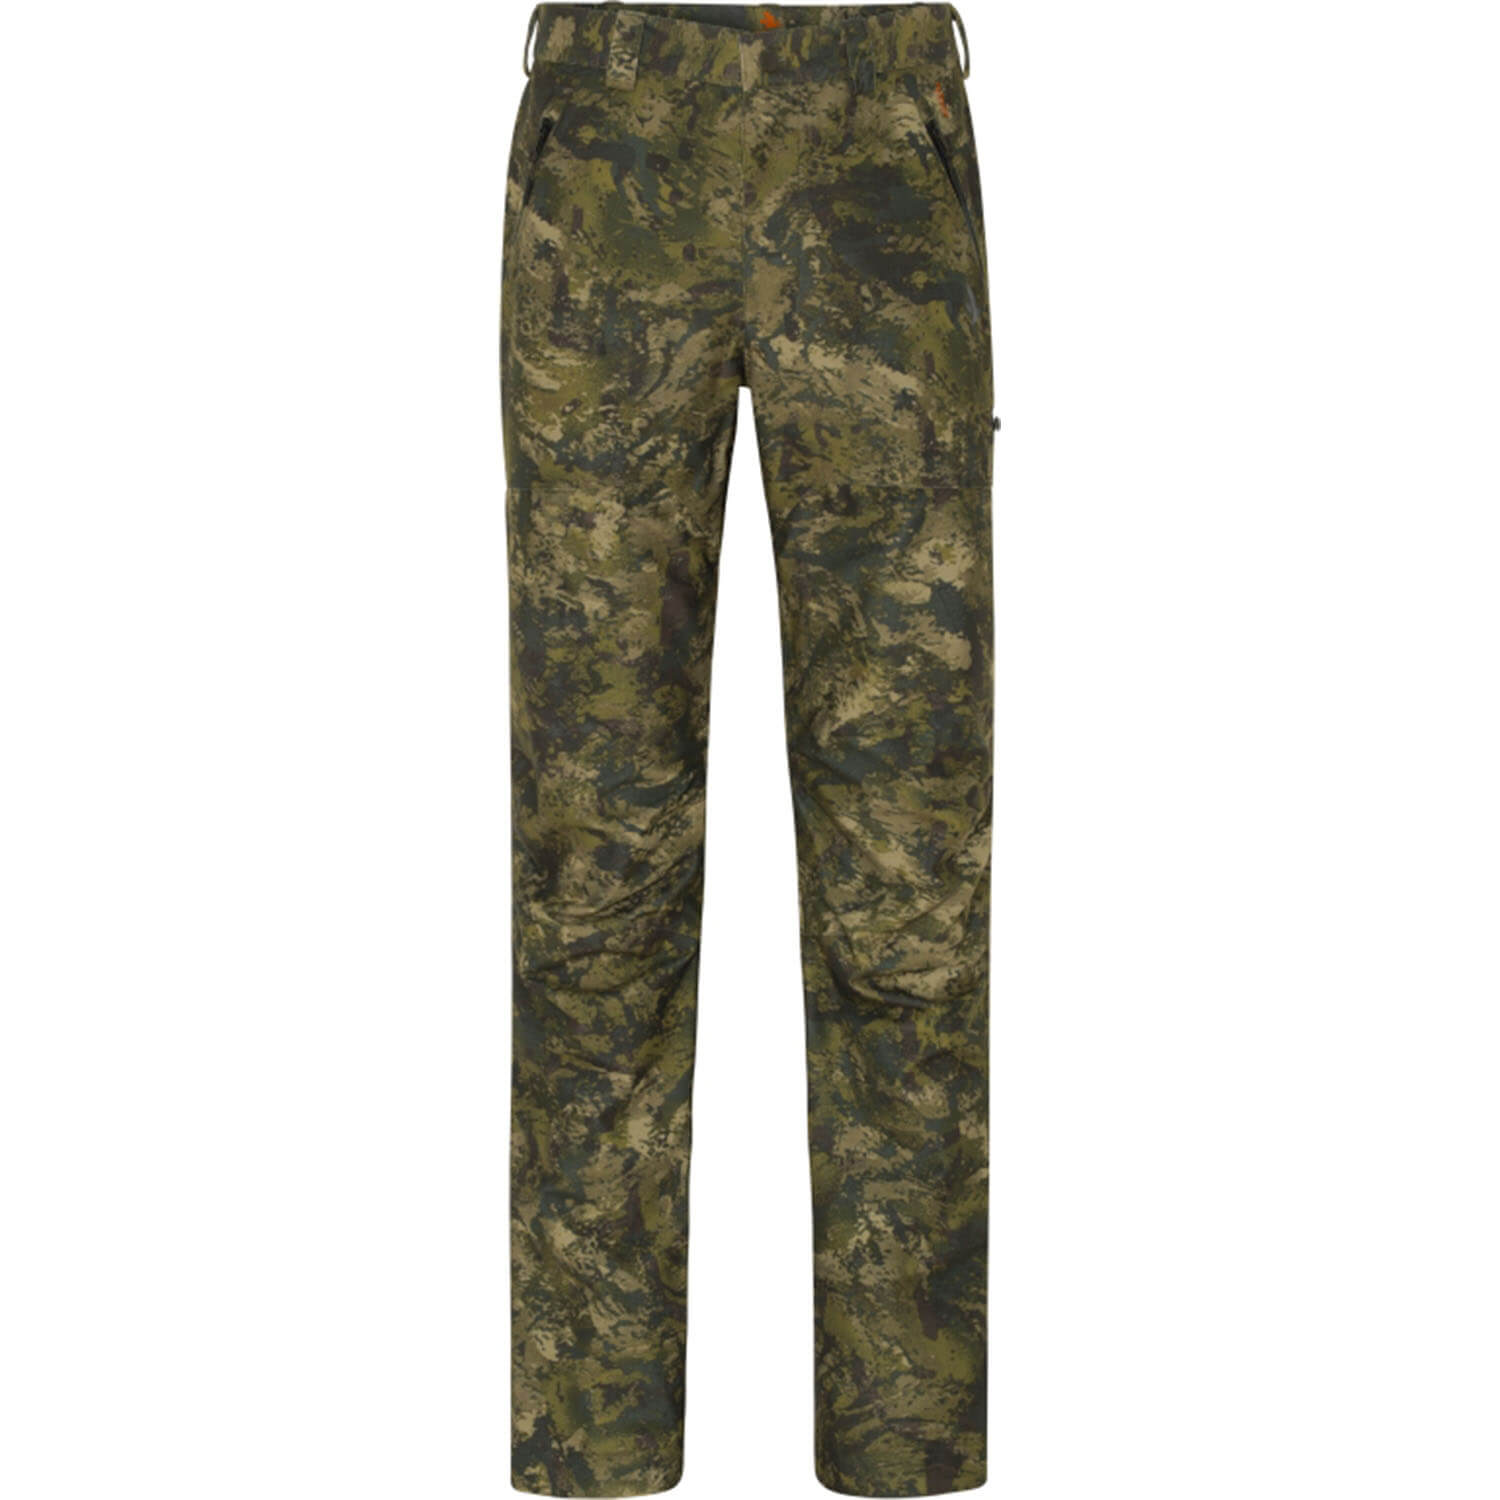 Seeland Jagdhose Avail (InVis) - Outlet